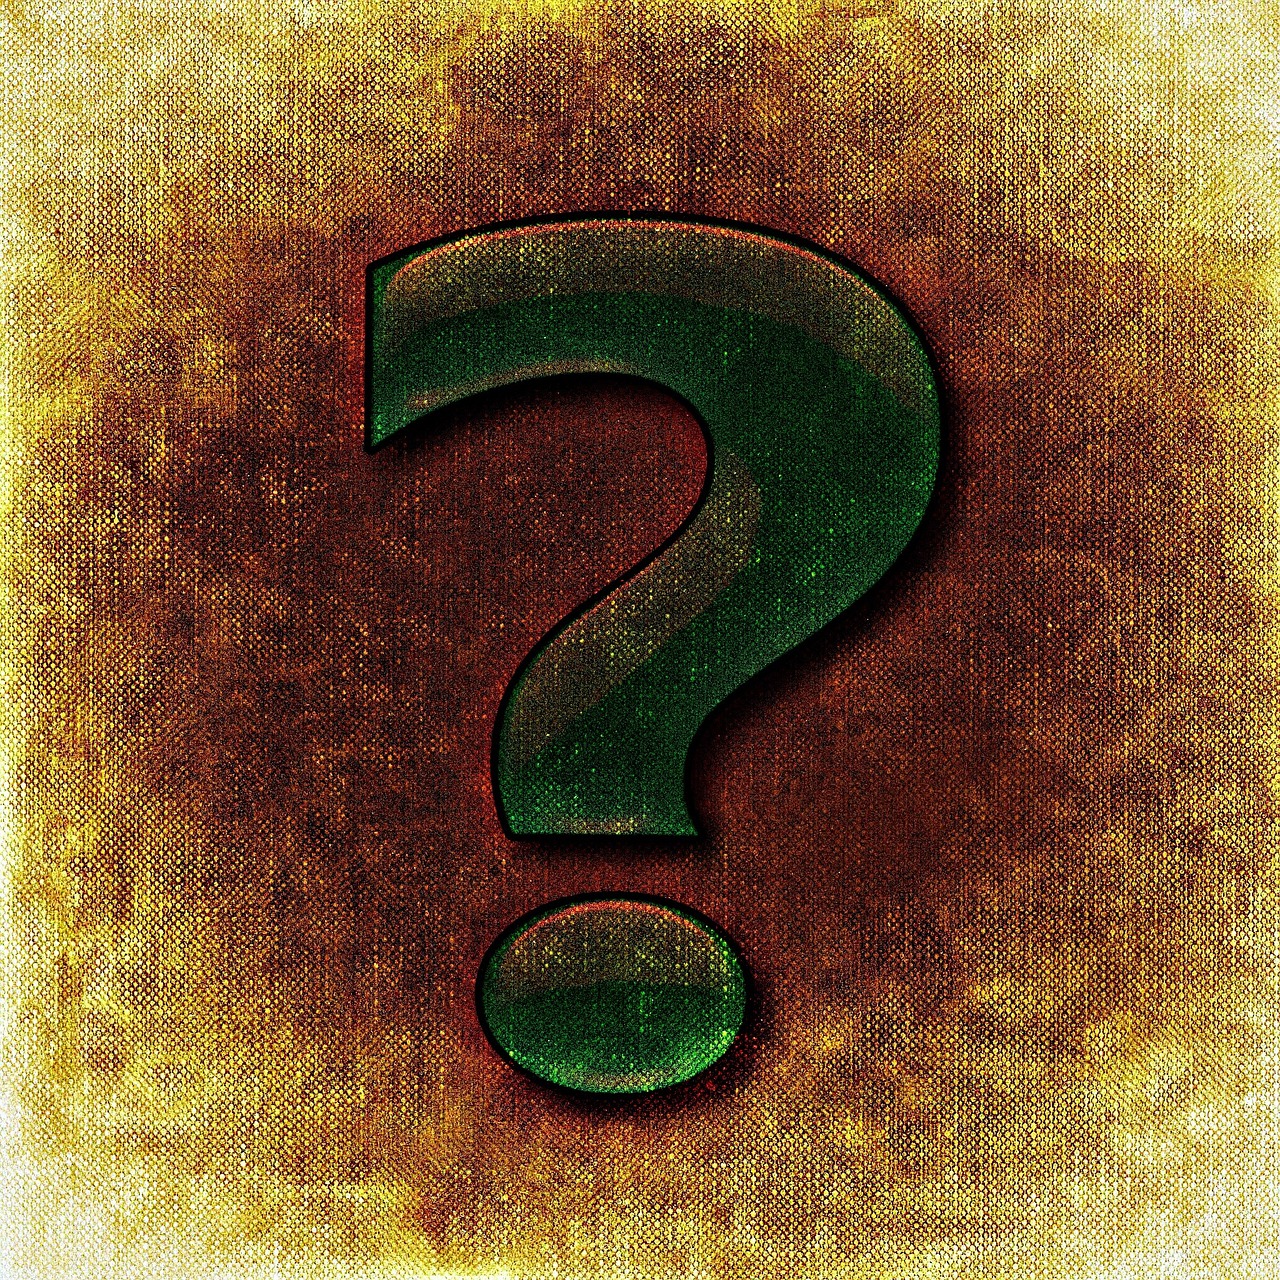 question mark frequently asked questions response free photo